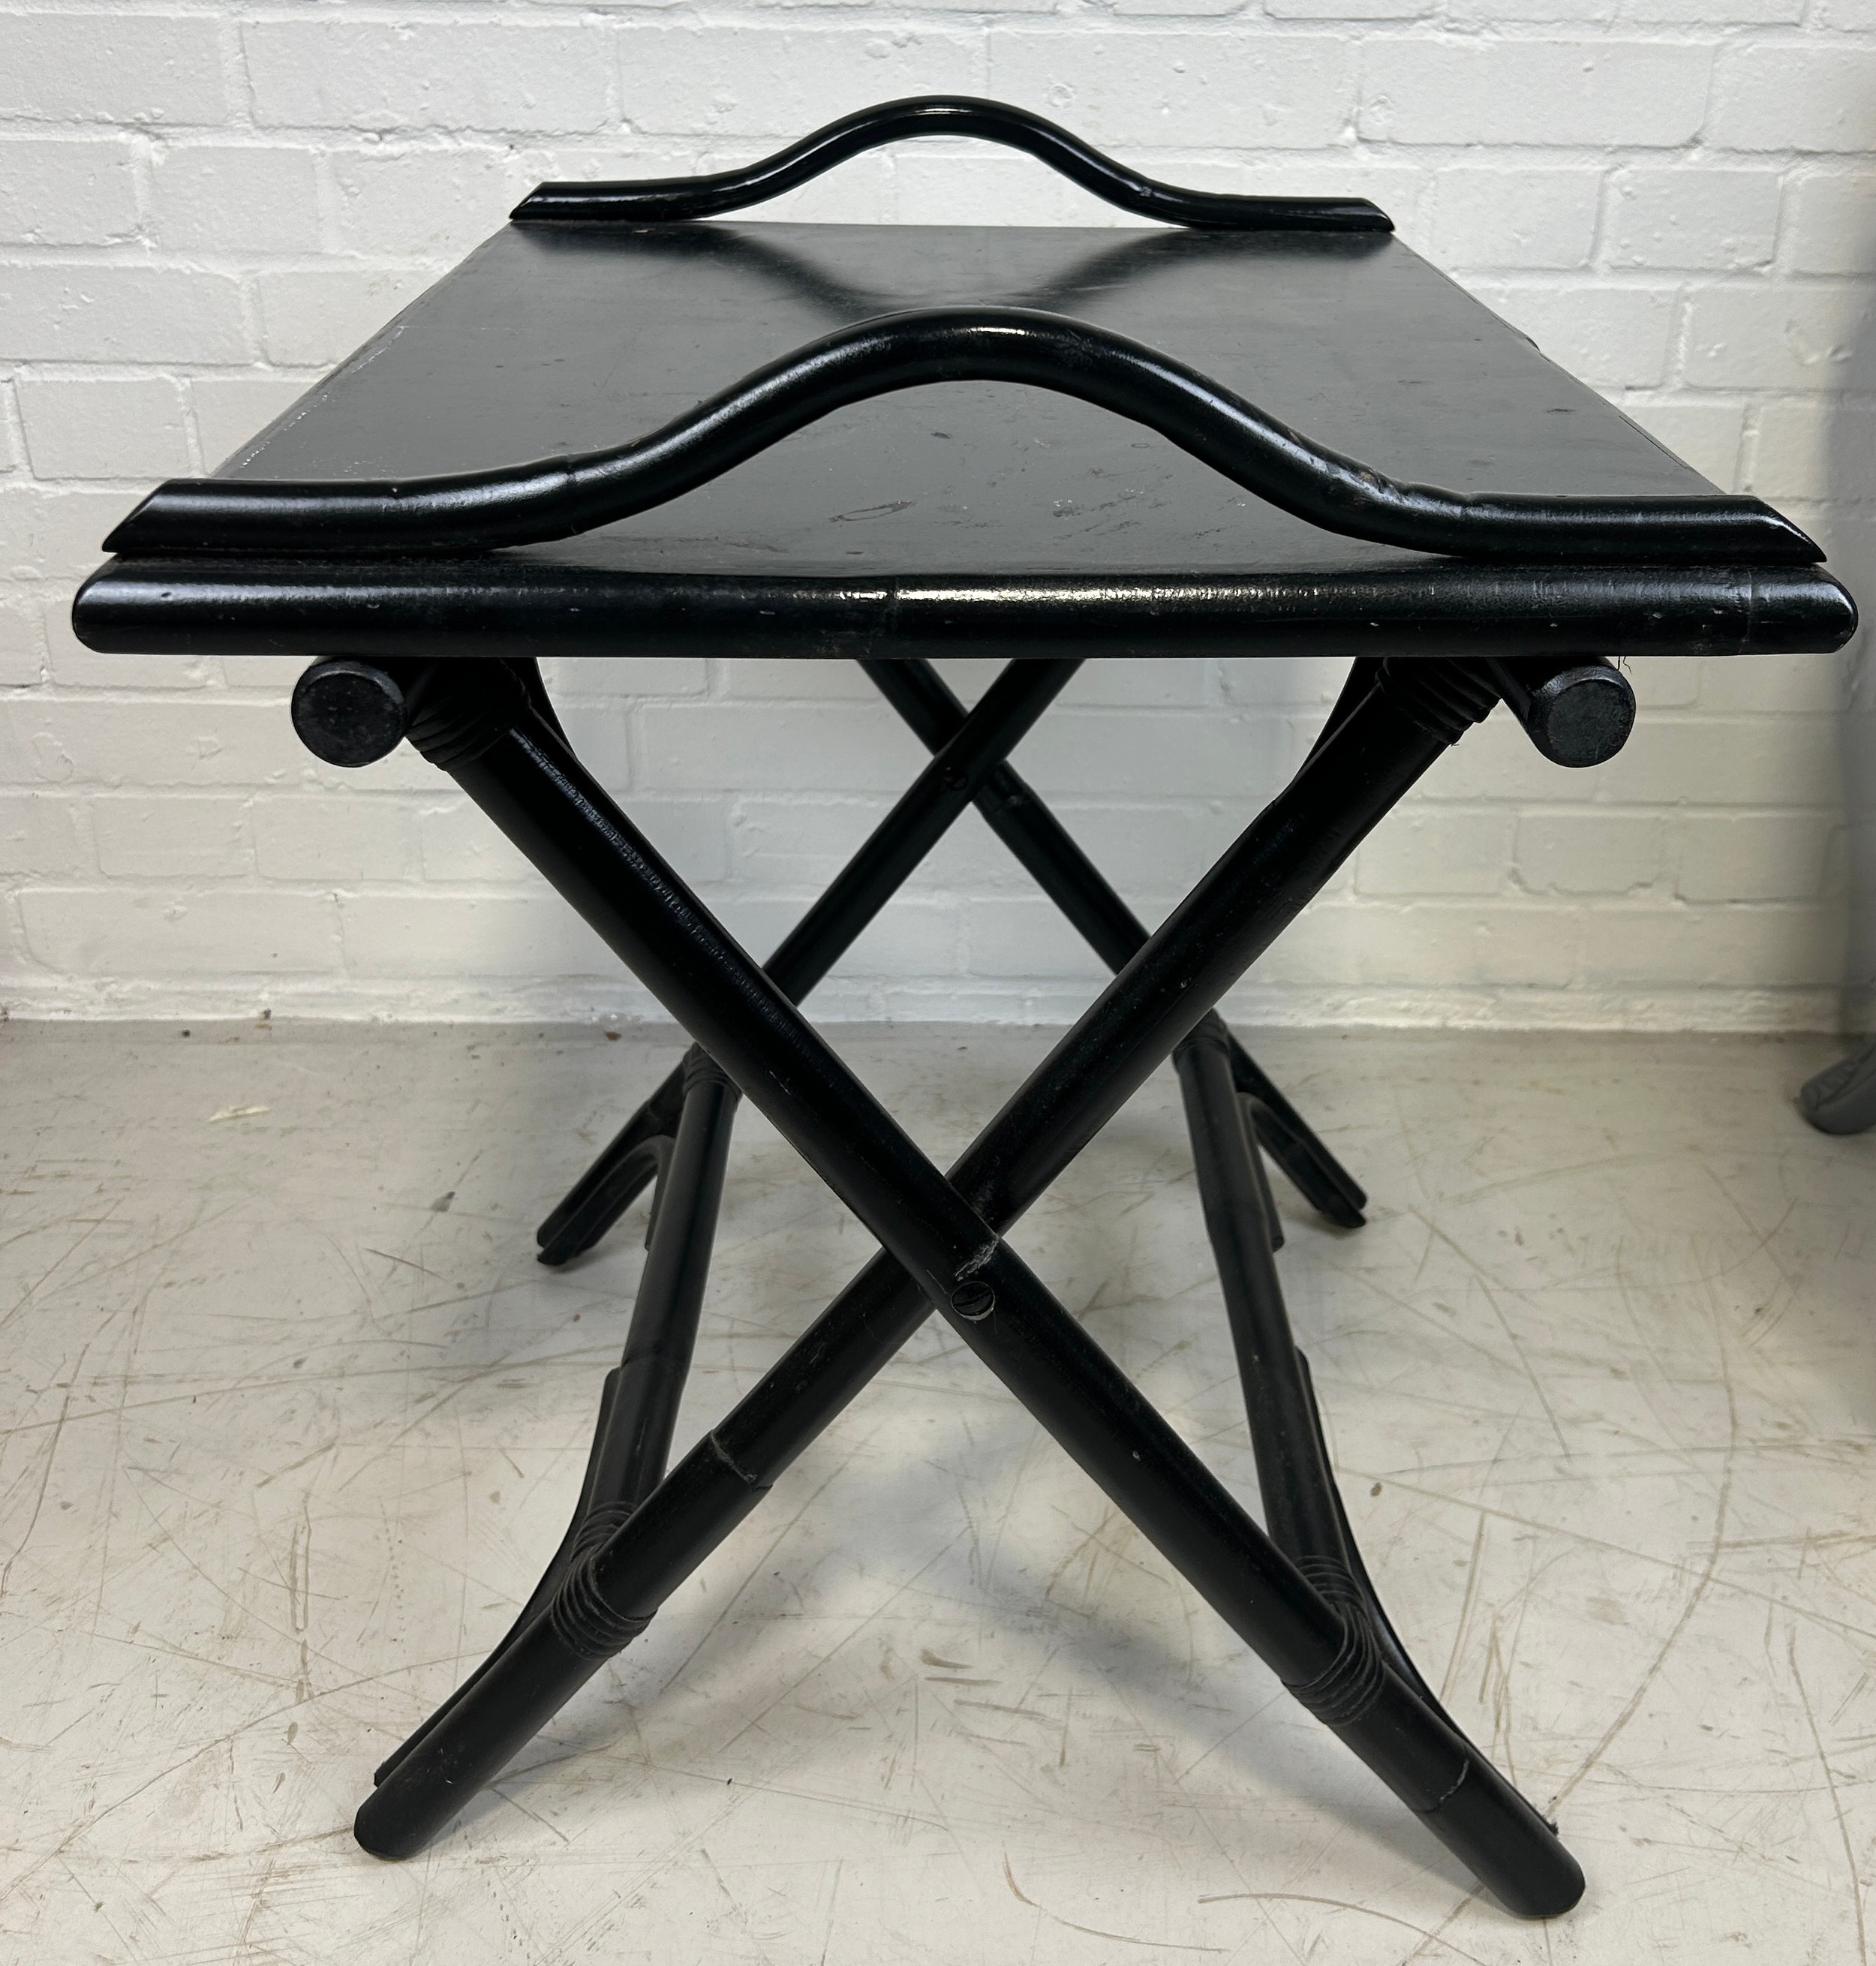 AN EBONISED BUTLERS STAND, 65cm x 60cm x 50cm